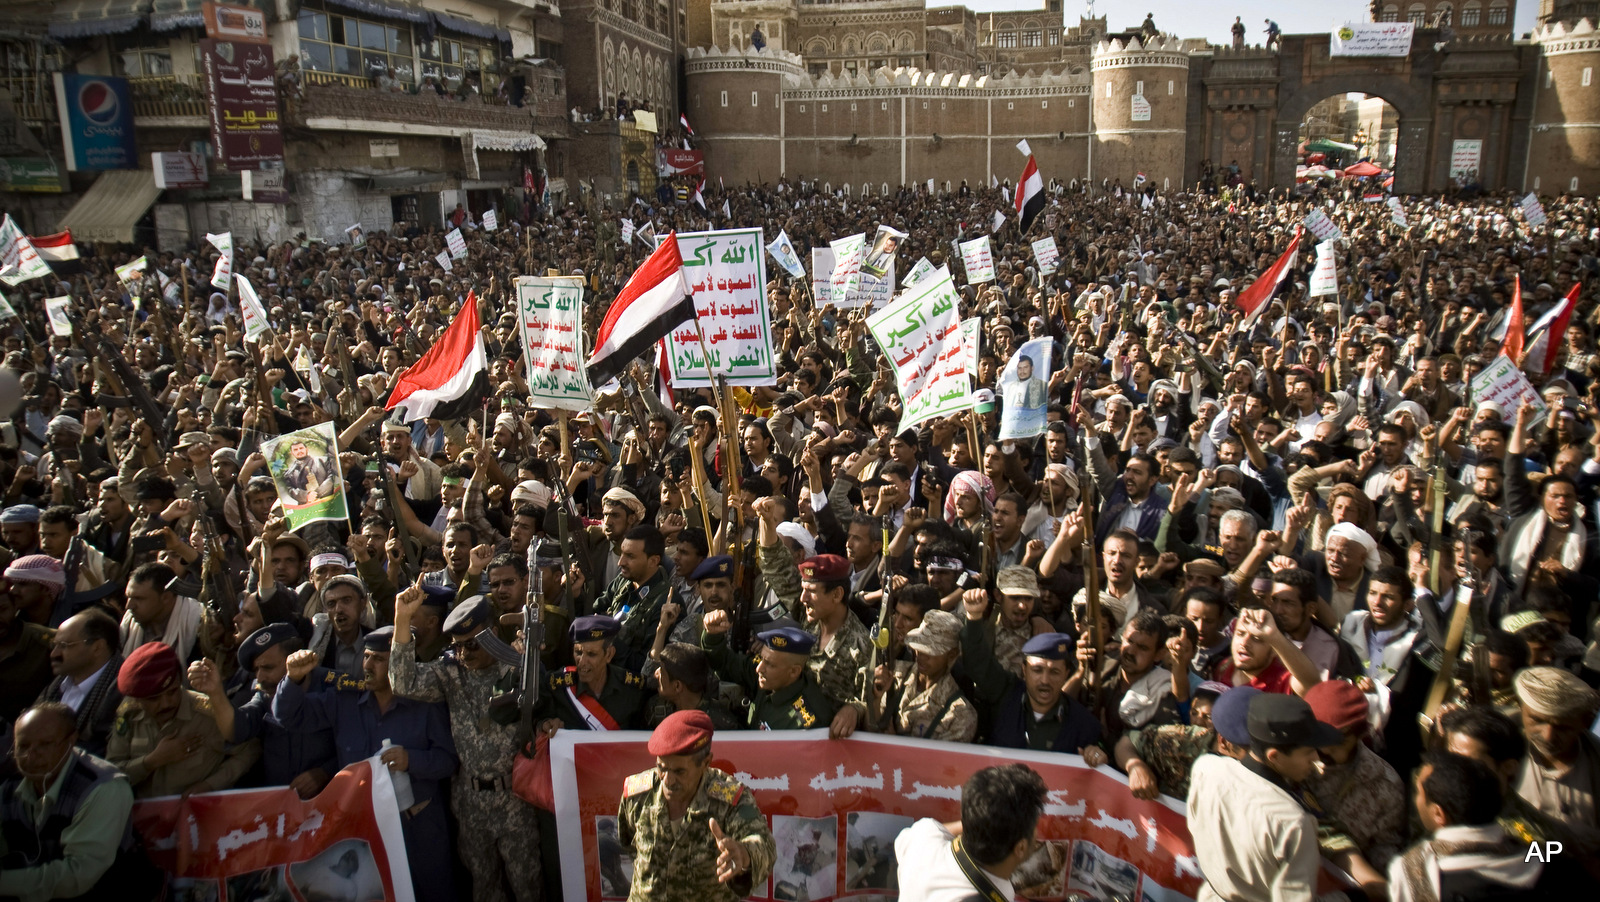 Houthis protest against Saudi airstrikes, during a rally in Sanaa, Yemen, Wednesday, April 1, 2015.